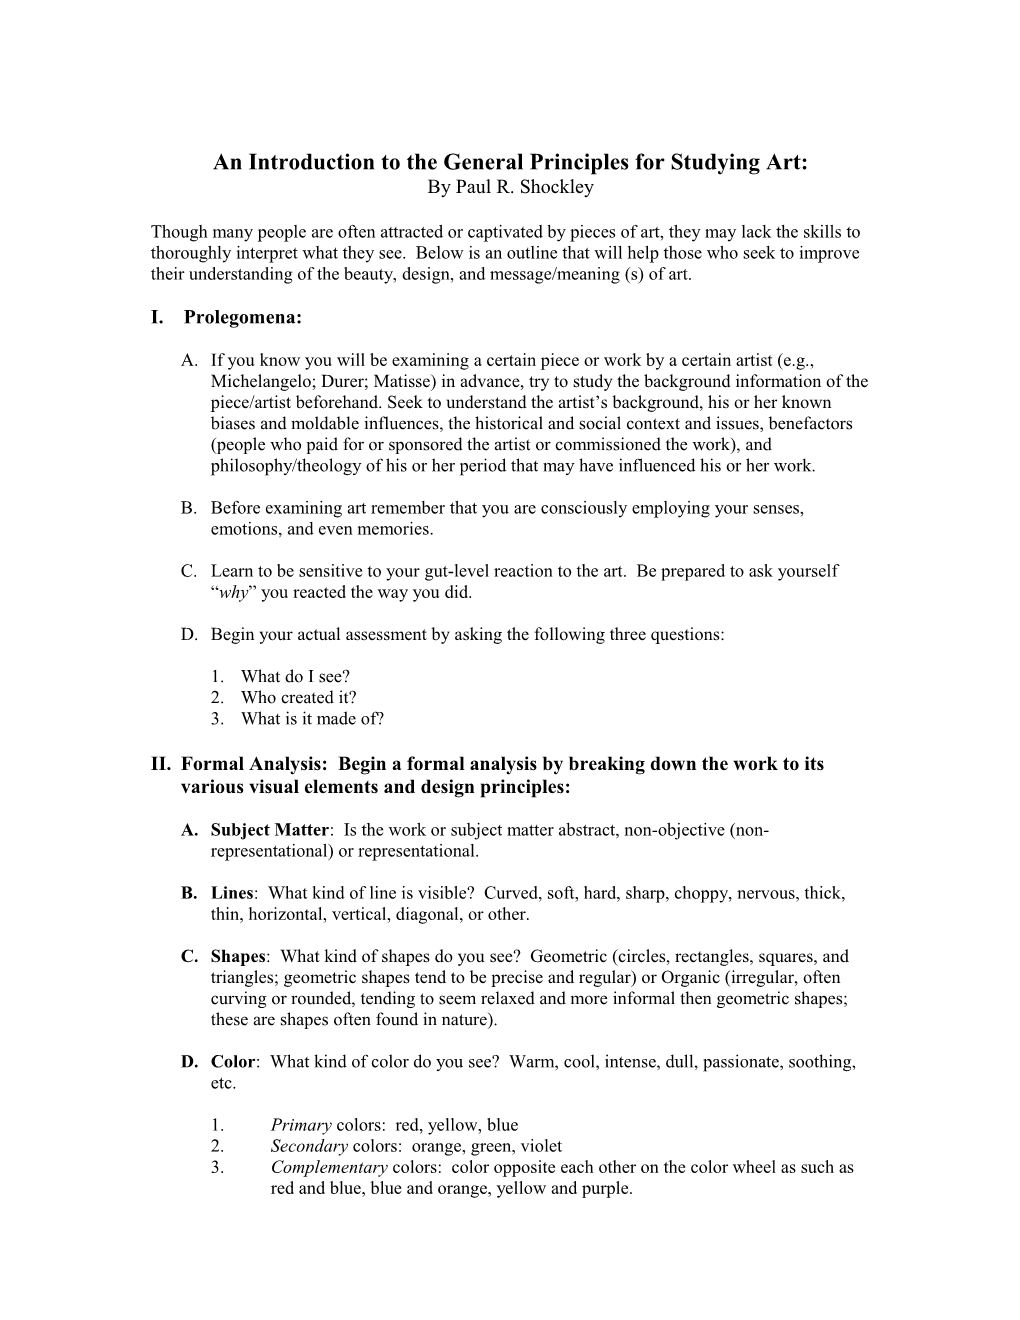 General Principles for Studying Art